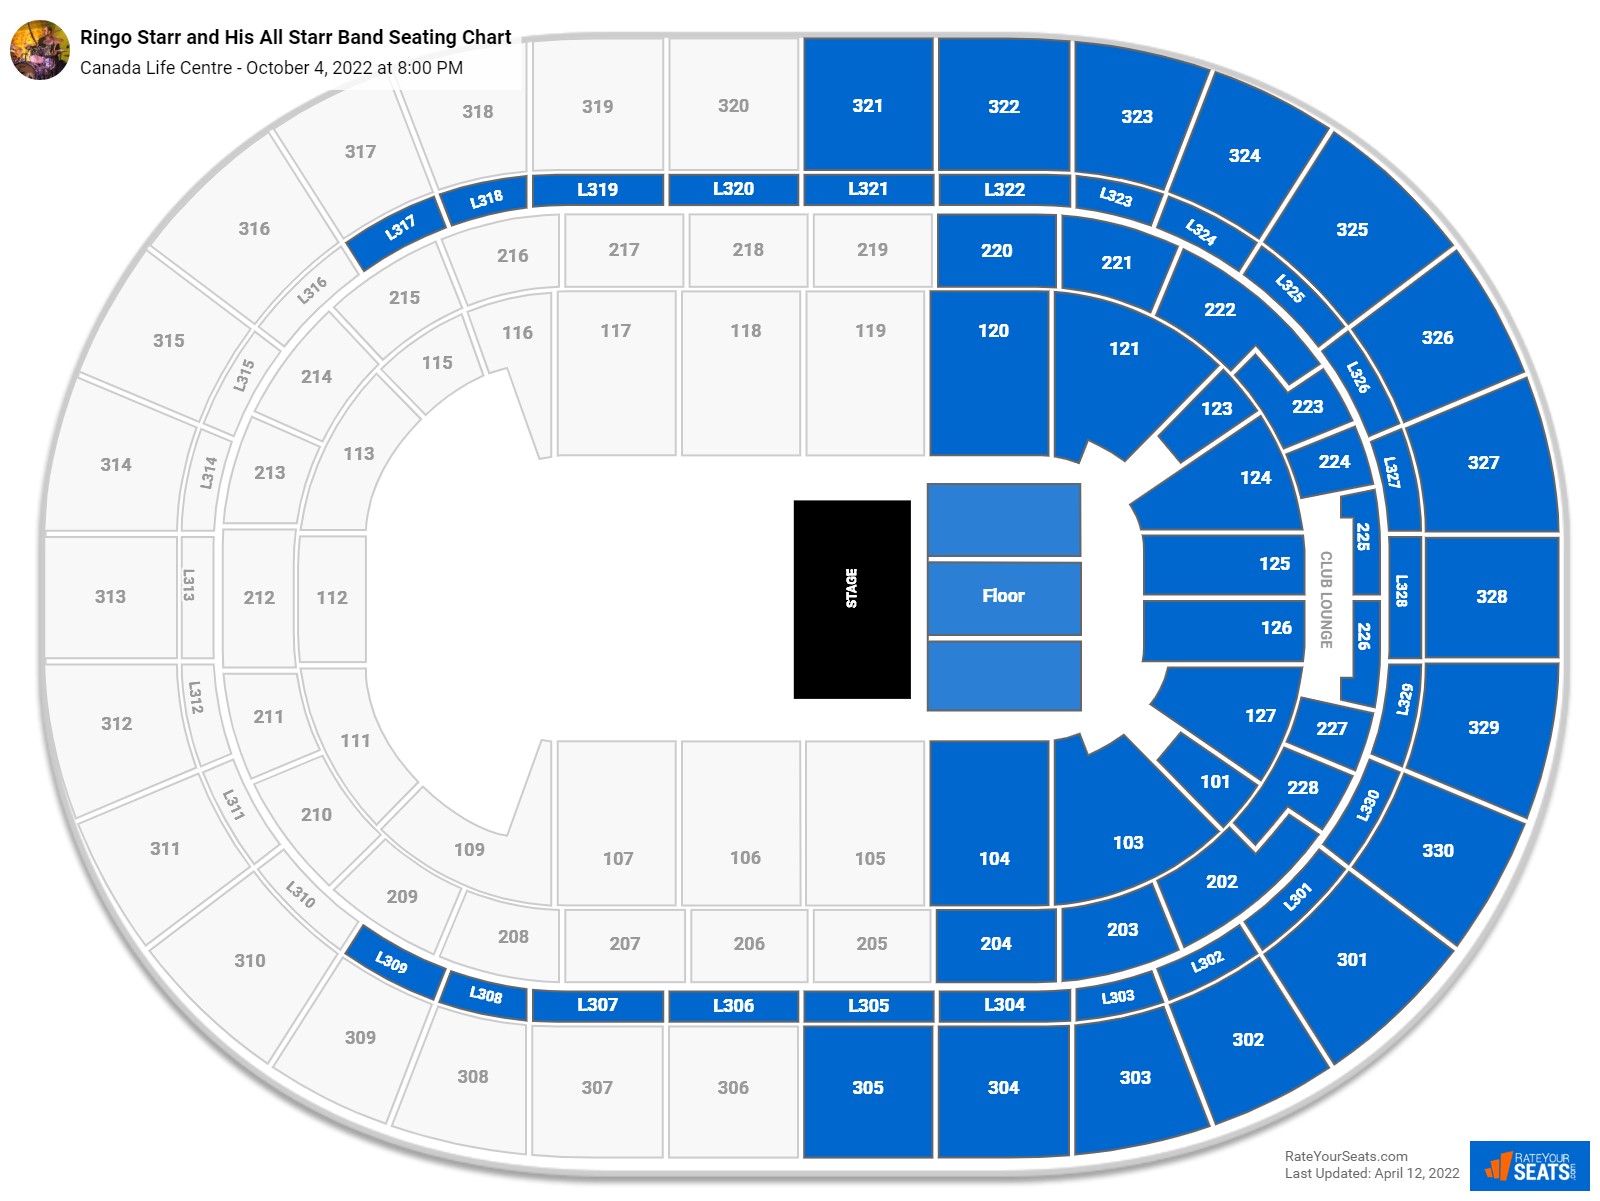 Canada Life Centre Concert Seating Chart